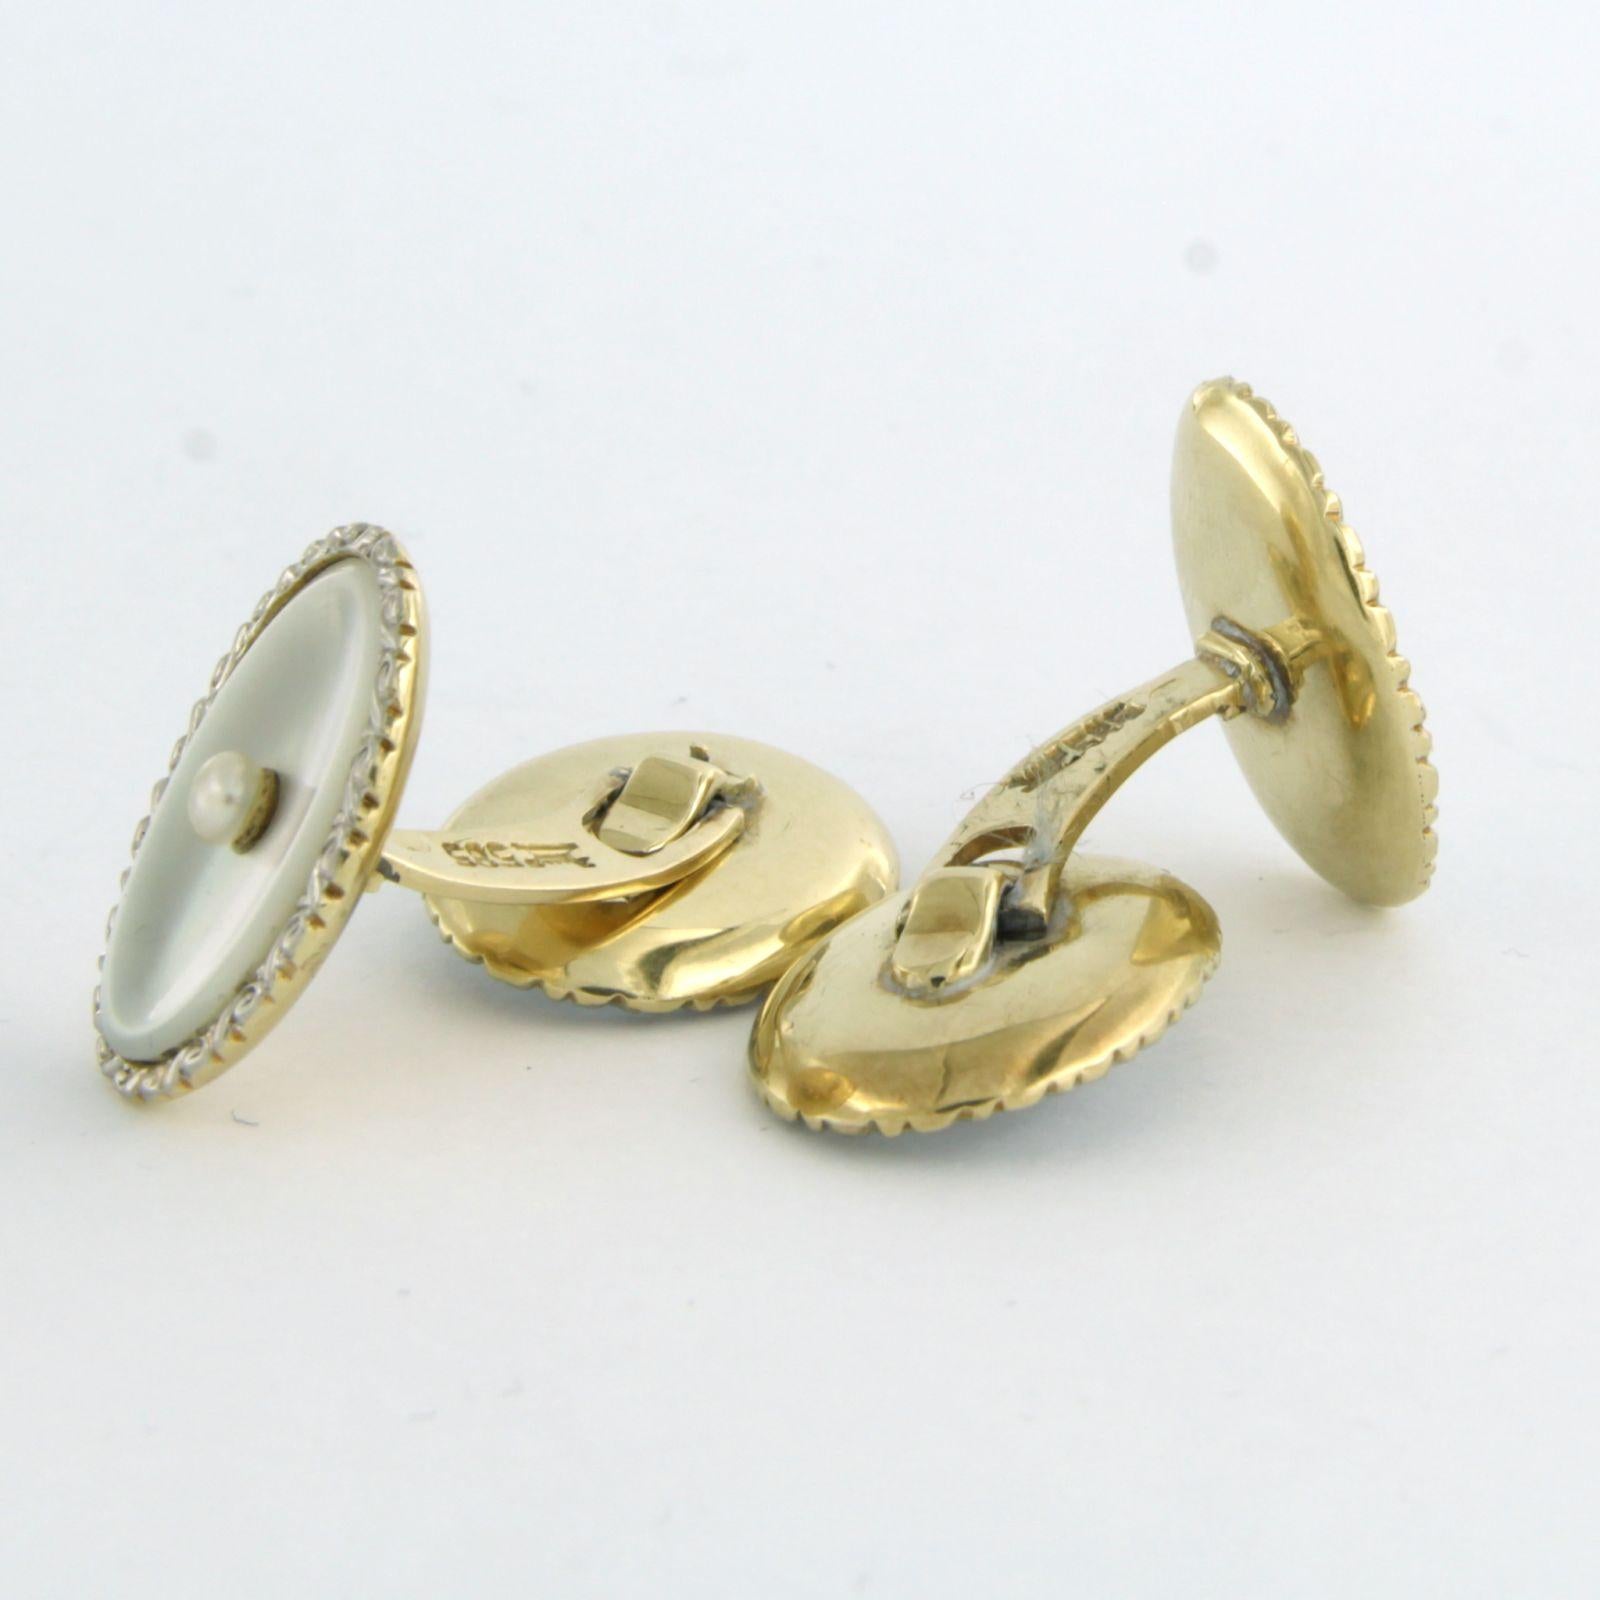 Women's 14k bicolour gold cufflinks set with mother of pearl and pearls – in case For Sale